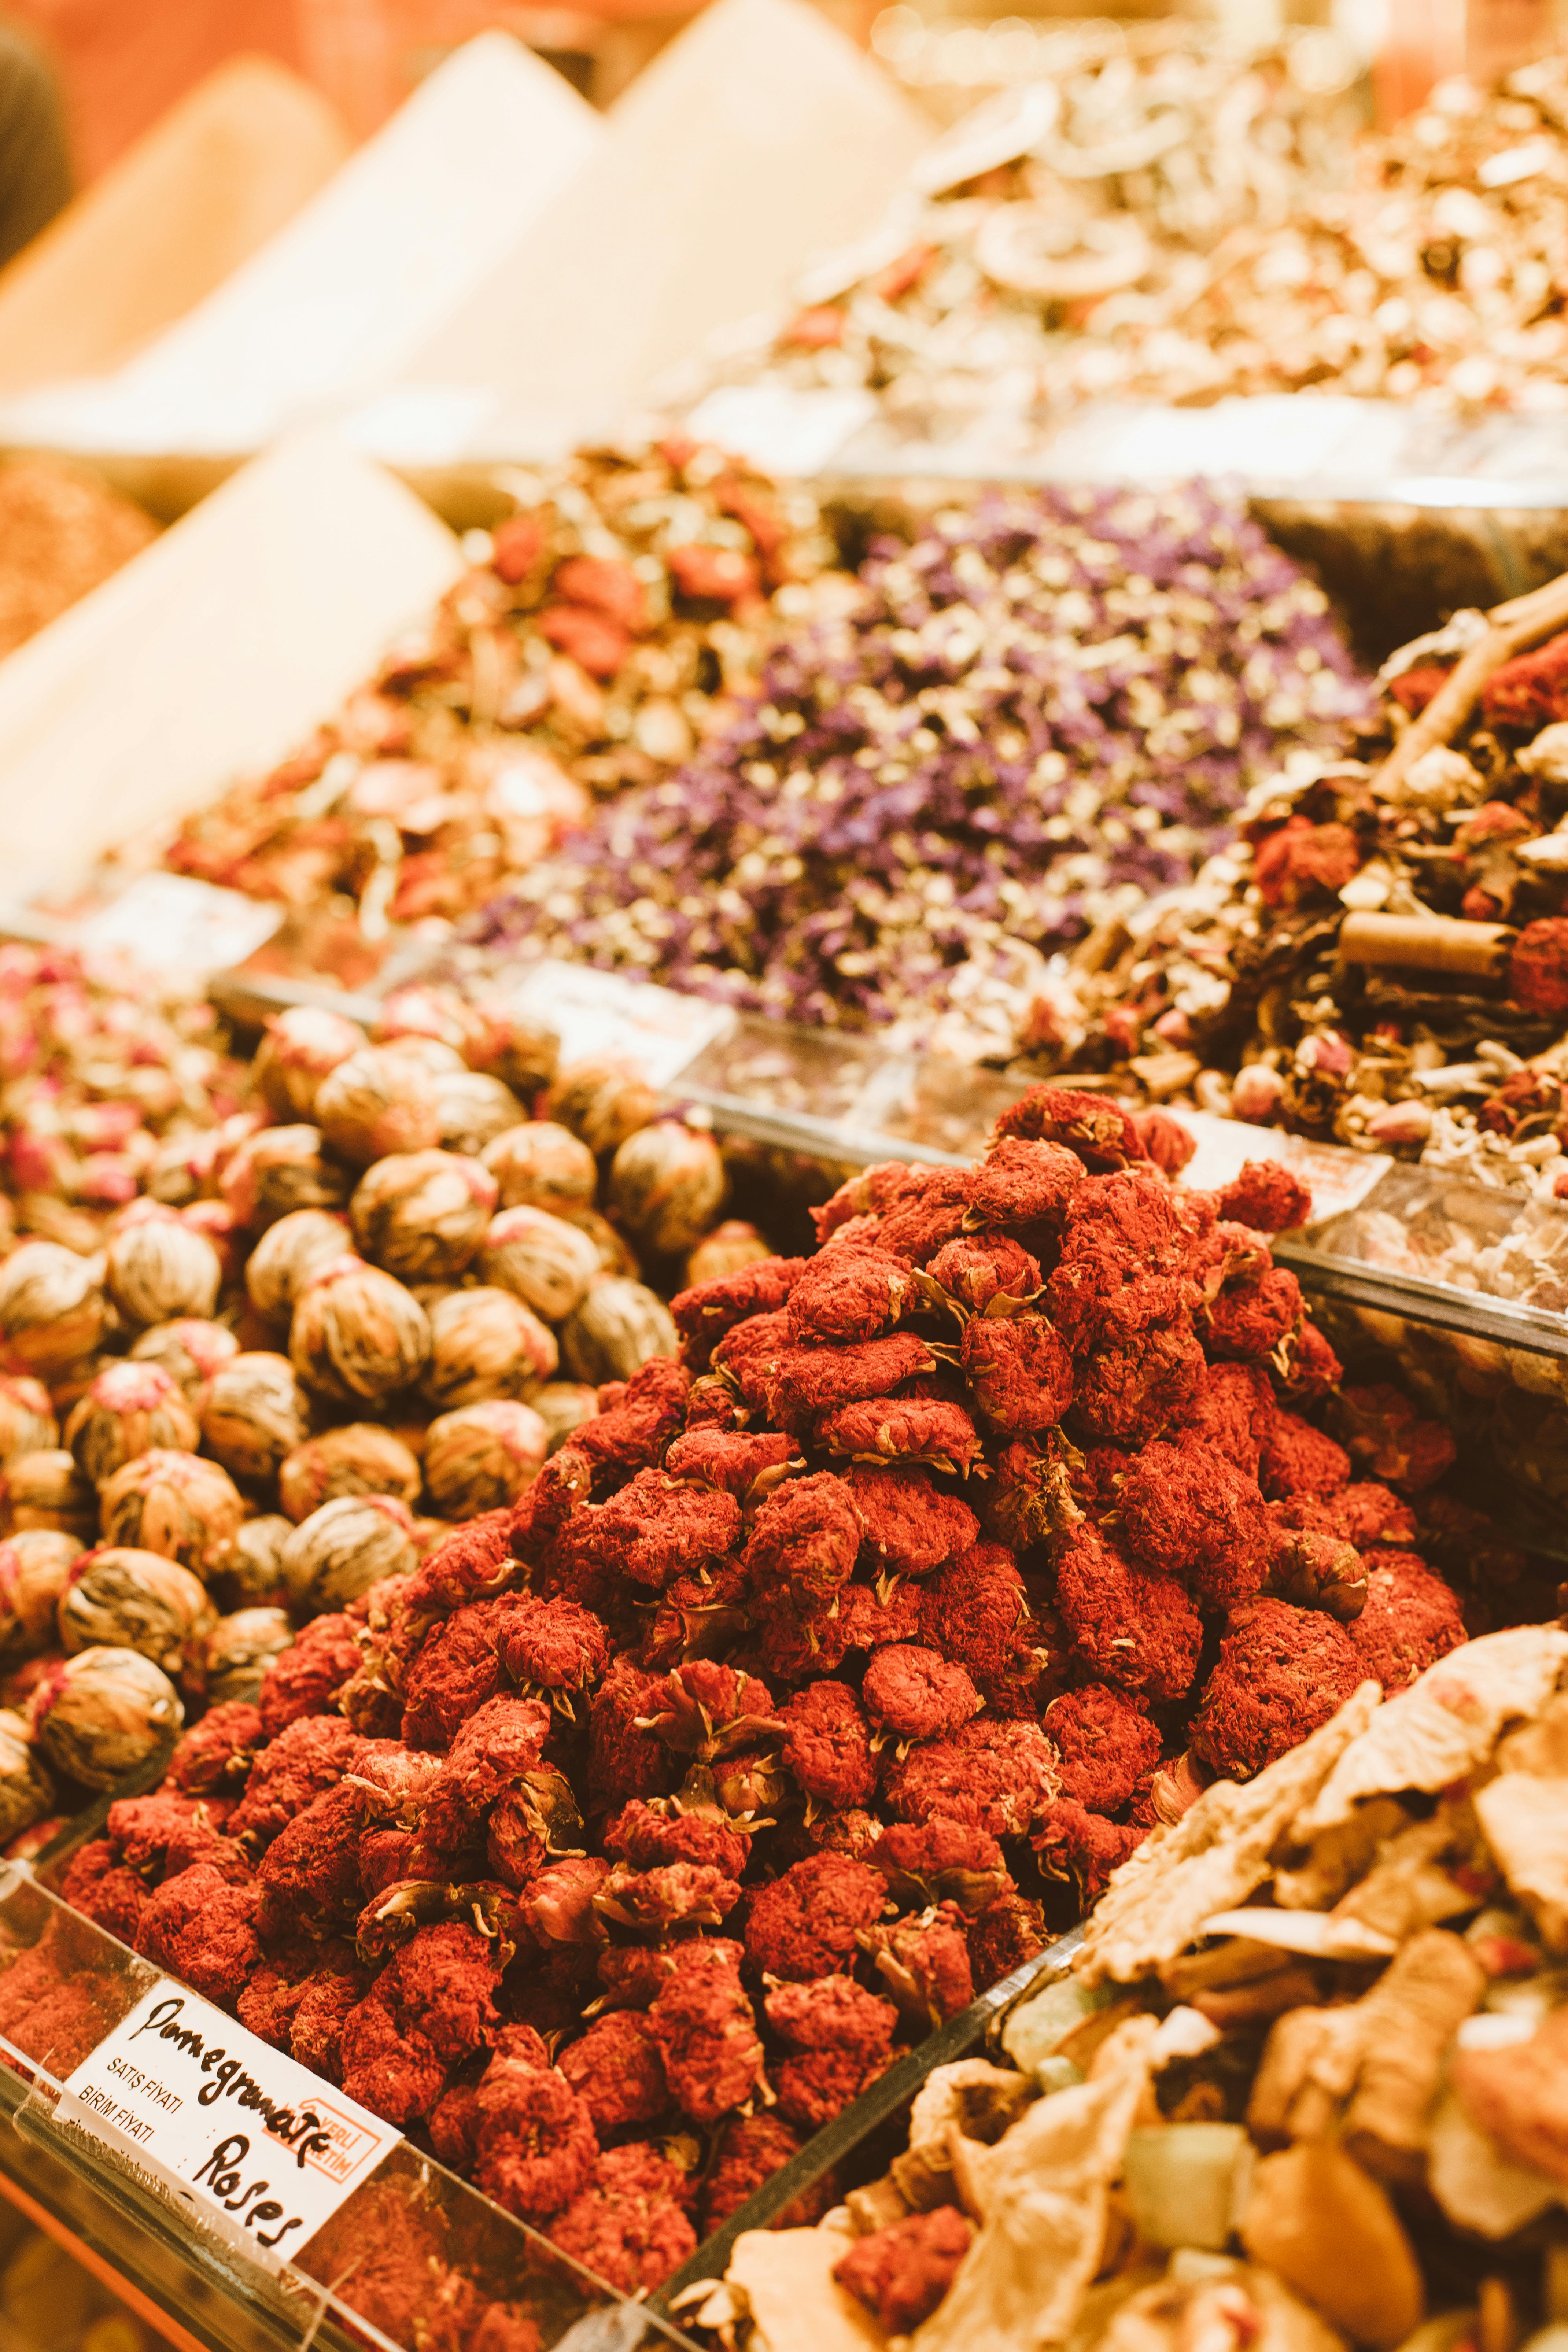 dried fruits on market stall